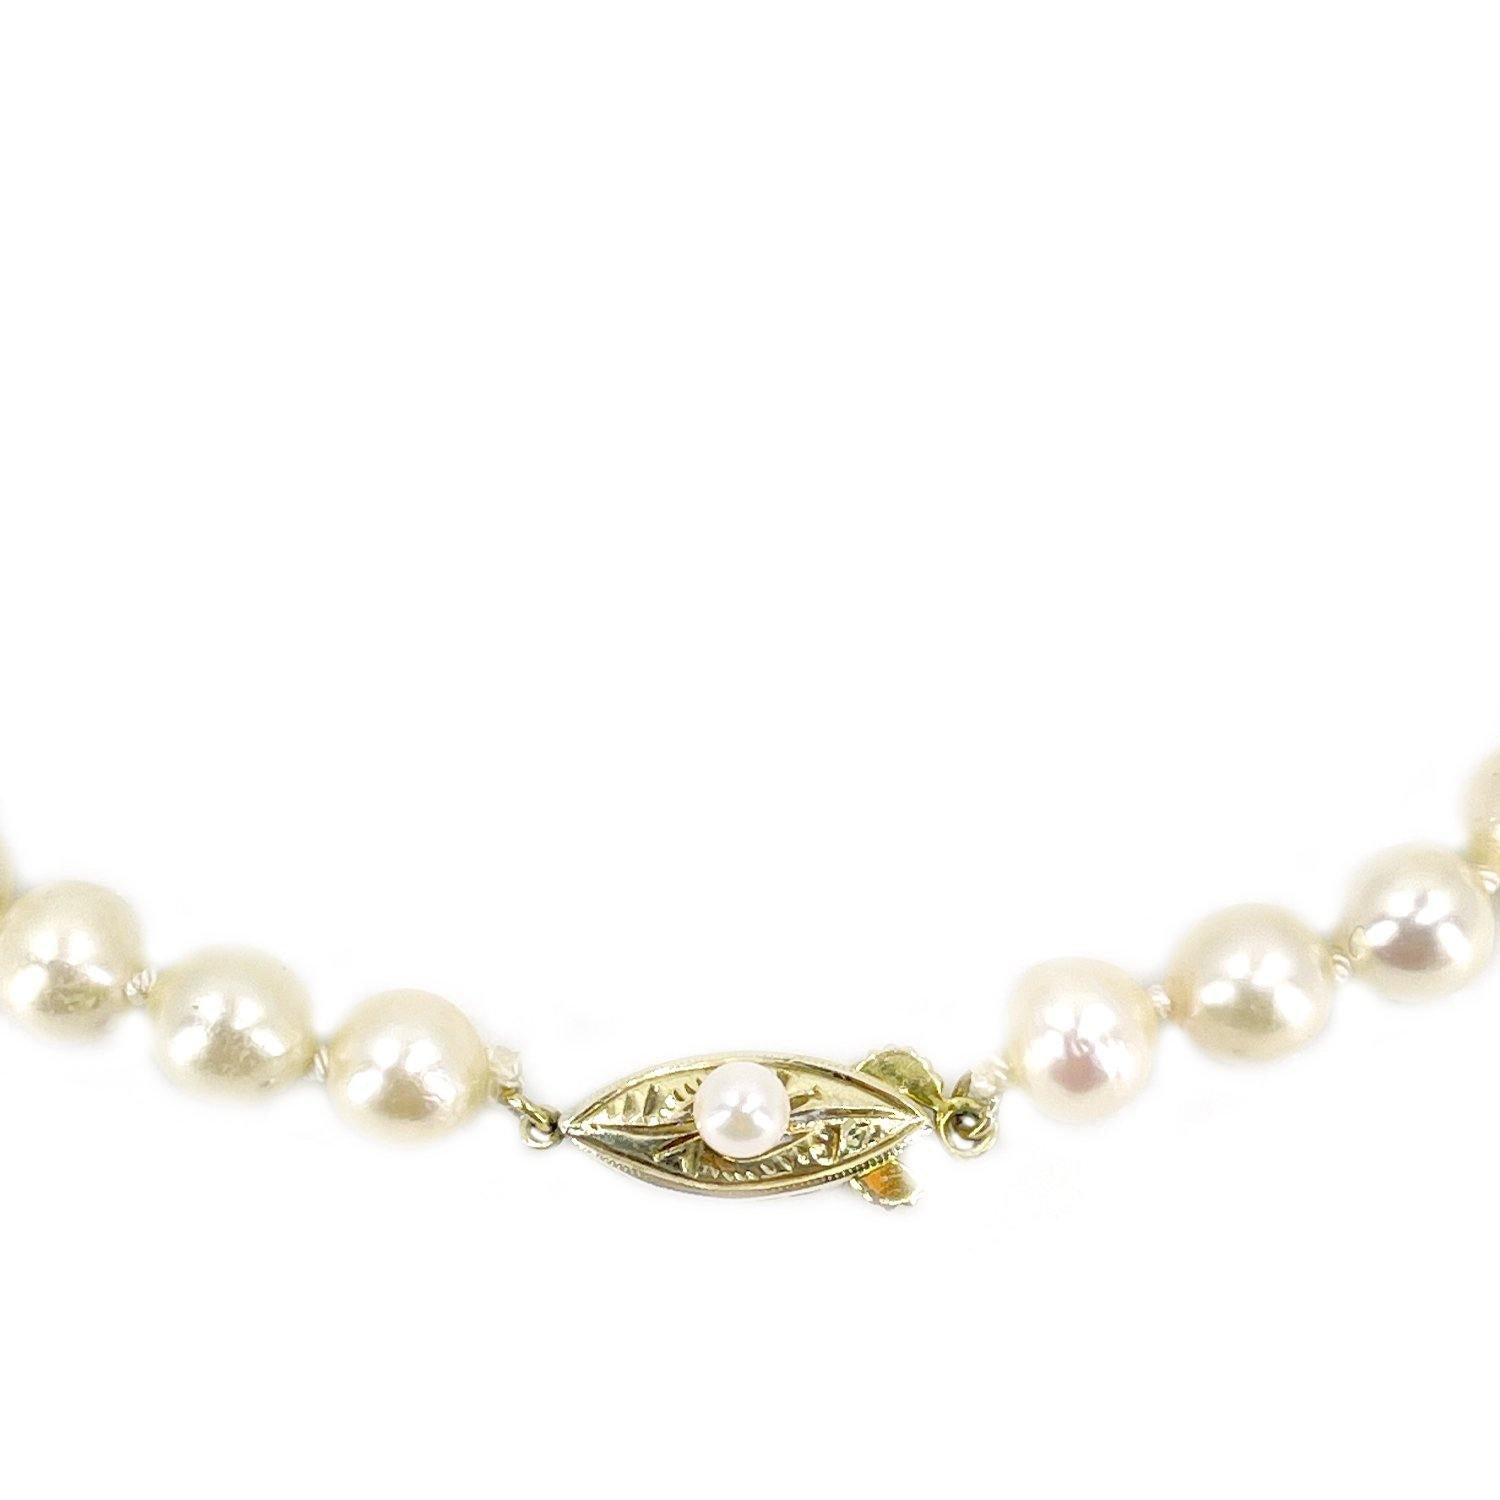 Deco Choker Japanese Saltwater Cultured Akoya Pearl Baroque Necklace - Sterling Silver 15 Inch